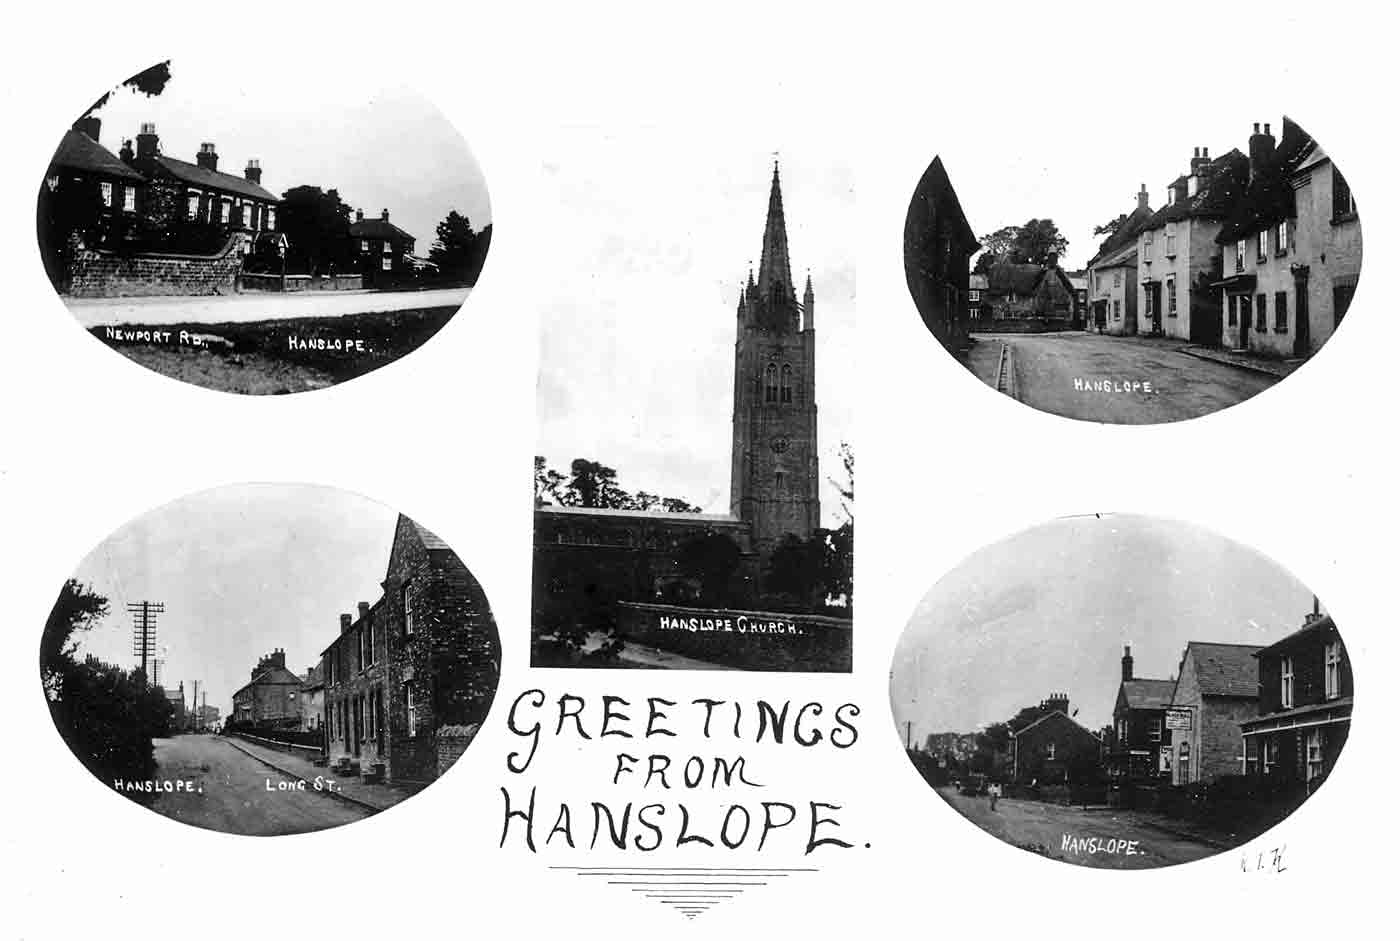 Greetings from Hanslope by Kitchener 1920s